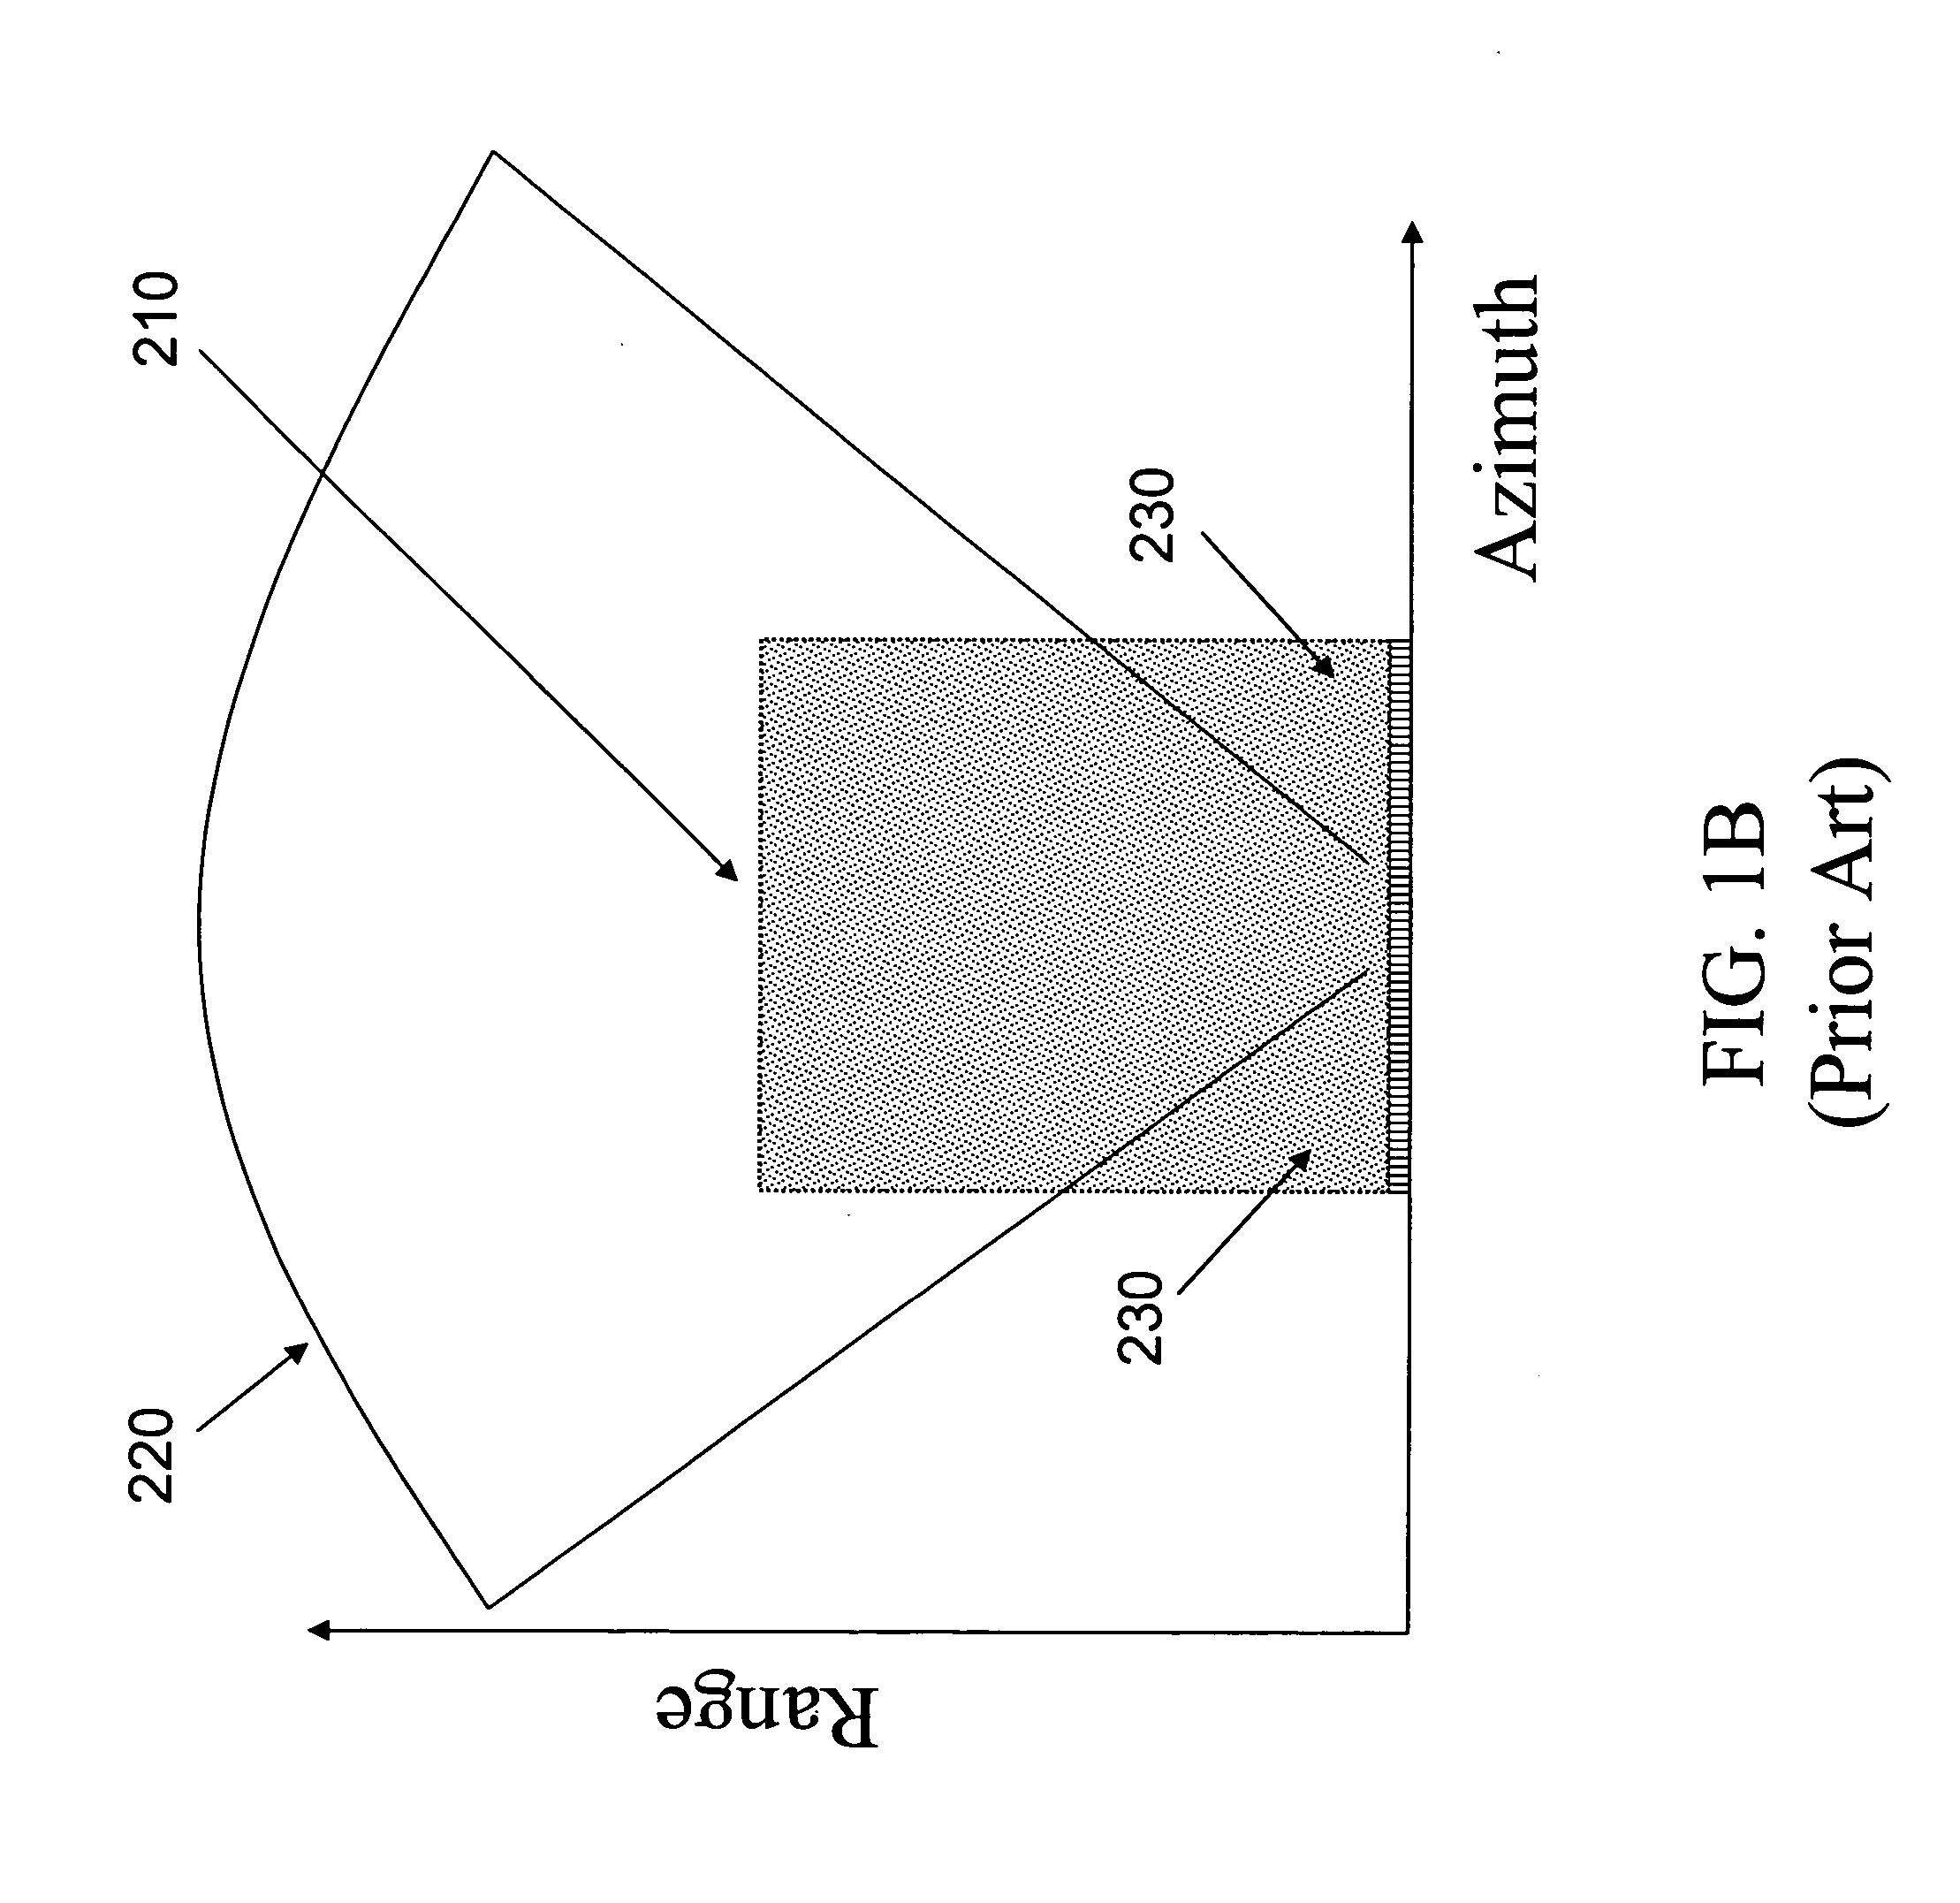 Microfabricated ultrasonic transducer array for 3-D imaging and method of operating the same